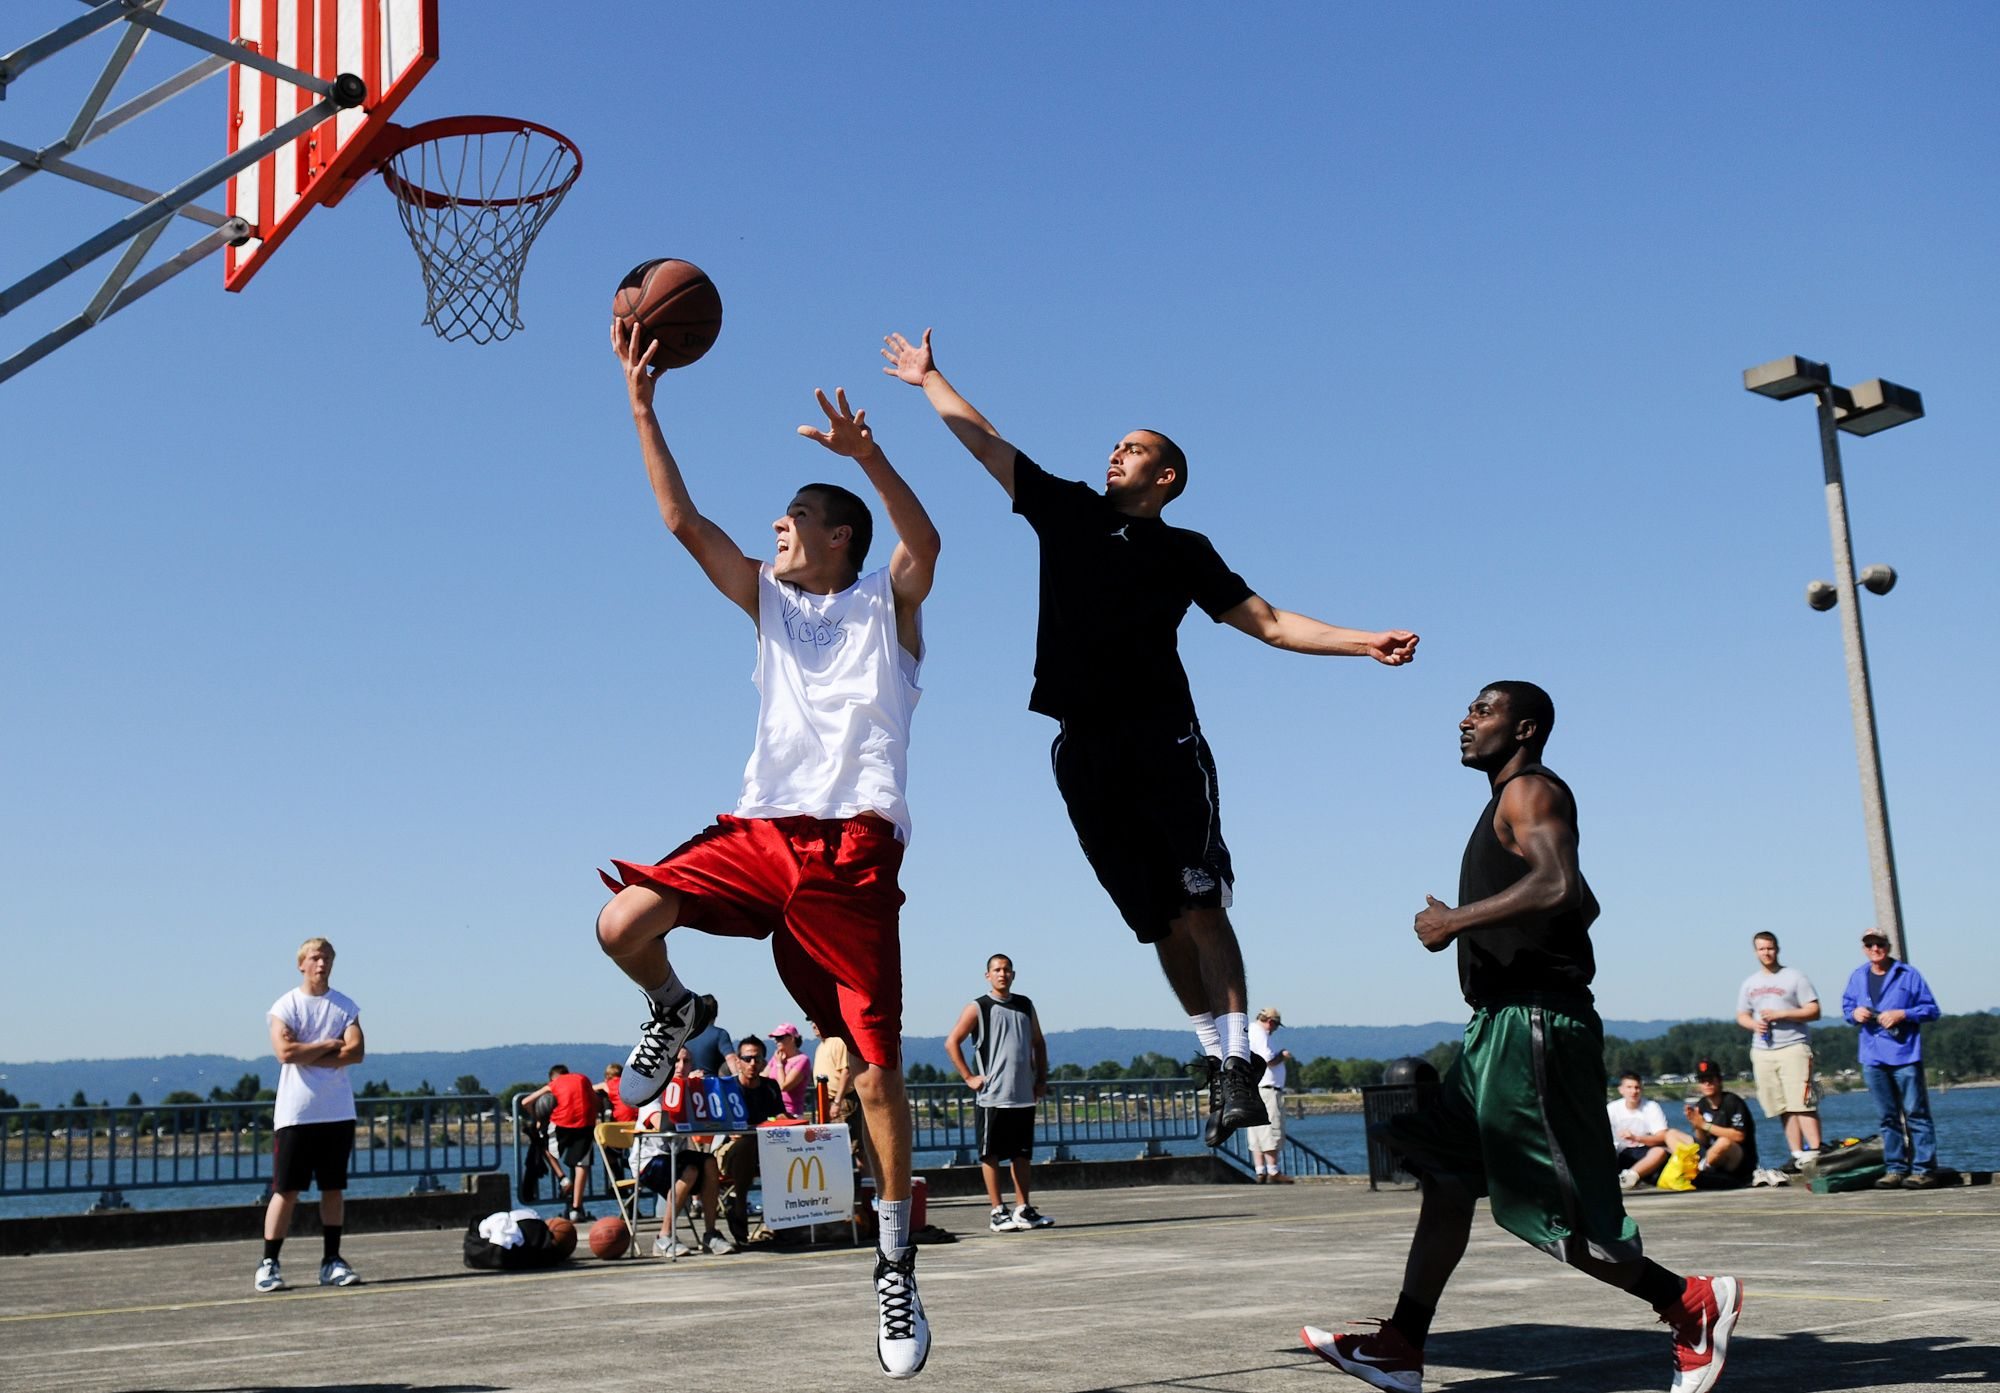 Jesse Kelsey of the Roos beats TBlaze's Joey Robleto for a layup during the Hoops on the River 3-on-3 basketball tournament Saturday. More than 200 teams signed up for the event that benefits Share.